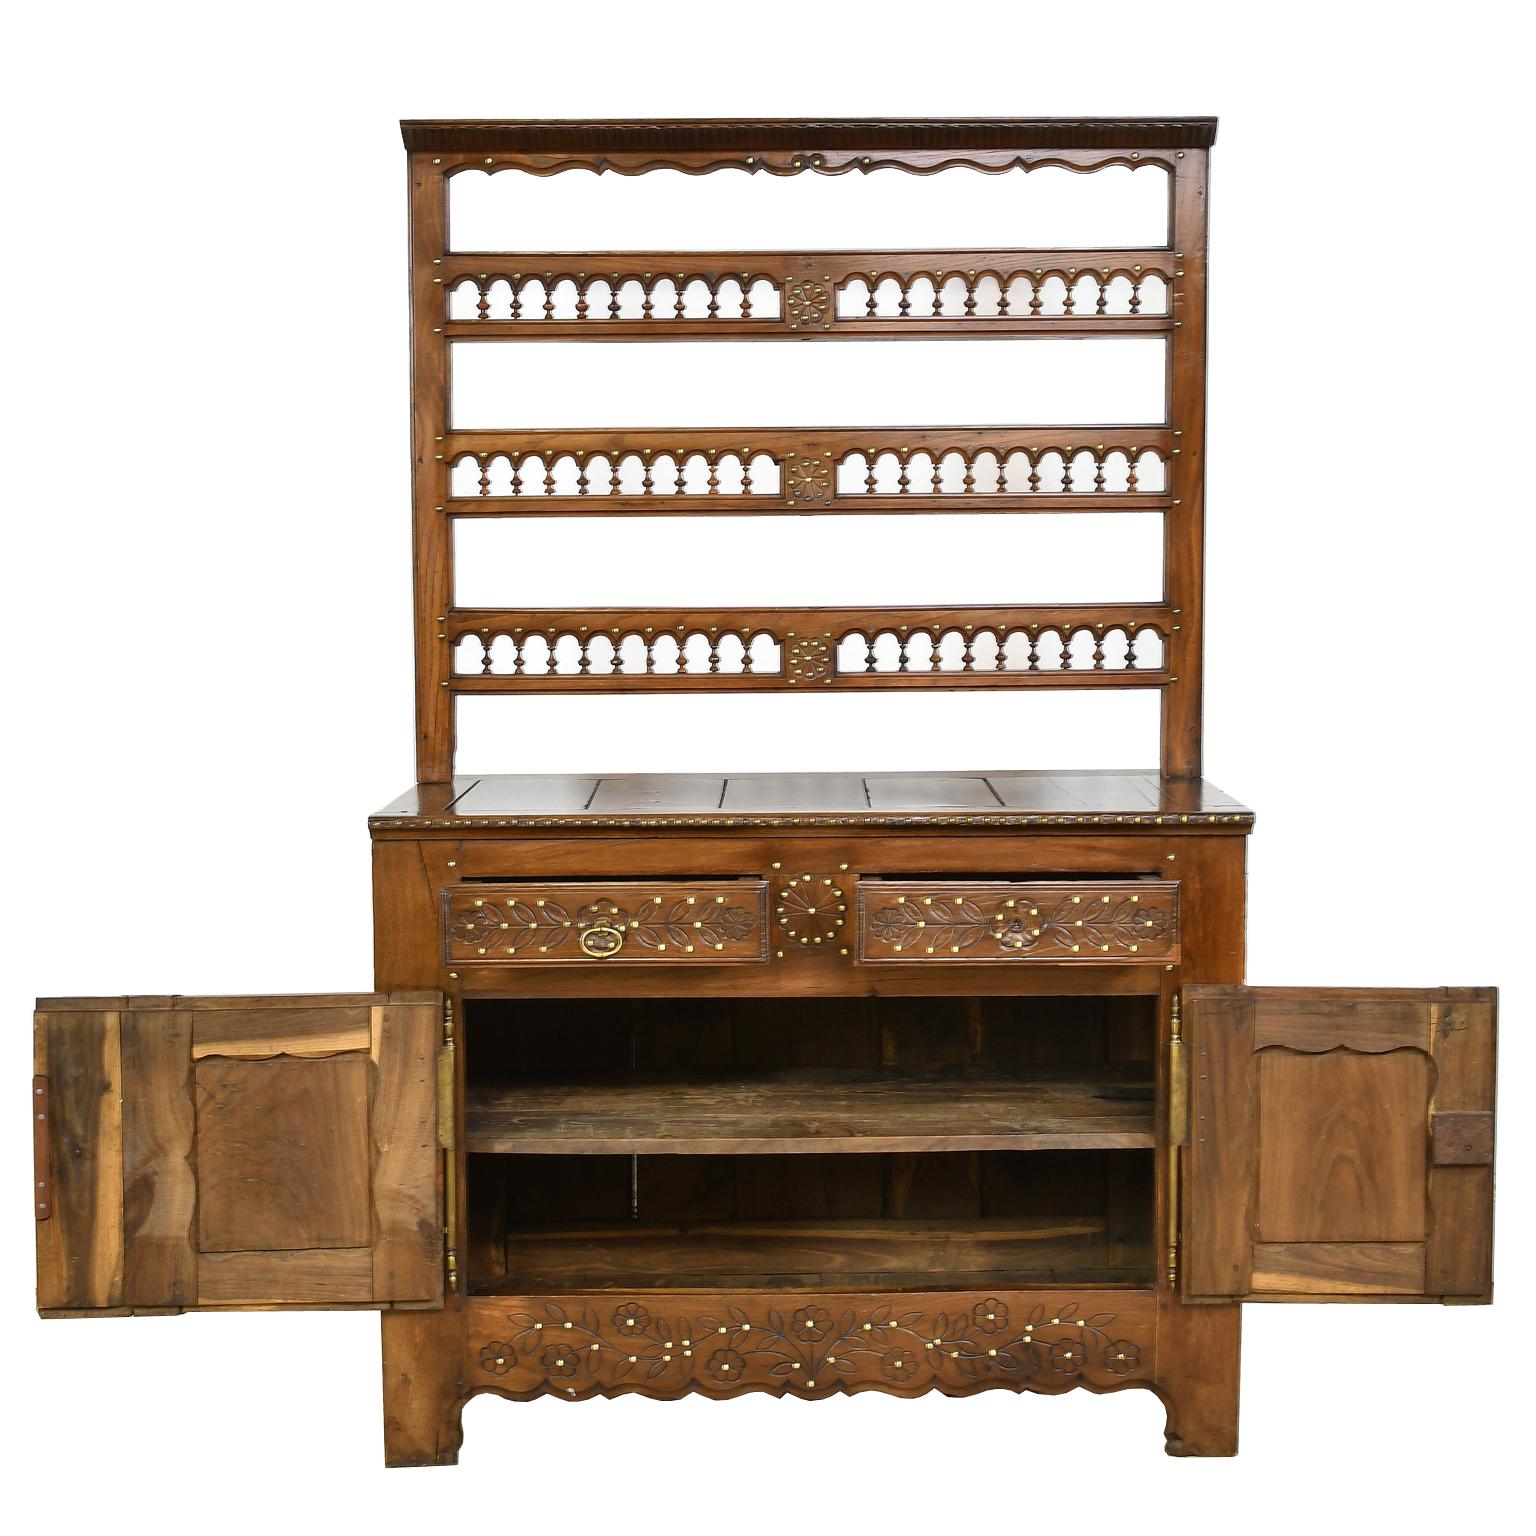 A lovely French Breton buffet-vaisselier or cupboard in chestnut with open dish rack. Incised foliate and floral carvings throughout are studded with decorative brass nailheads. Top is composed of an open rack with palmette carvings along crown